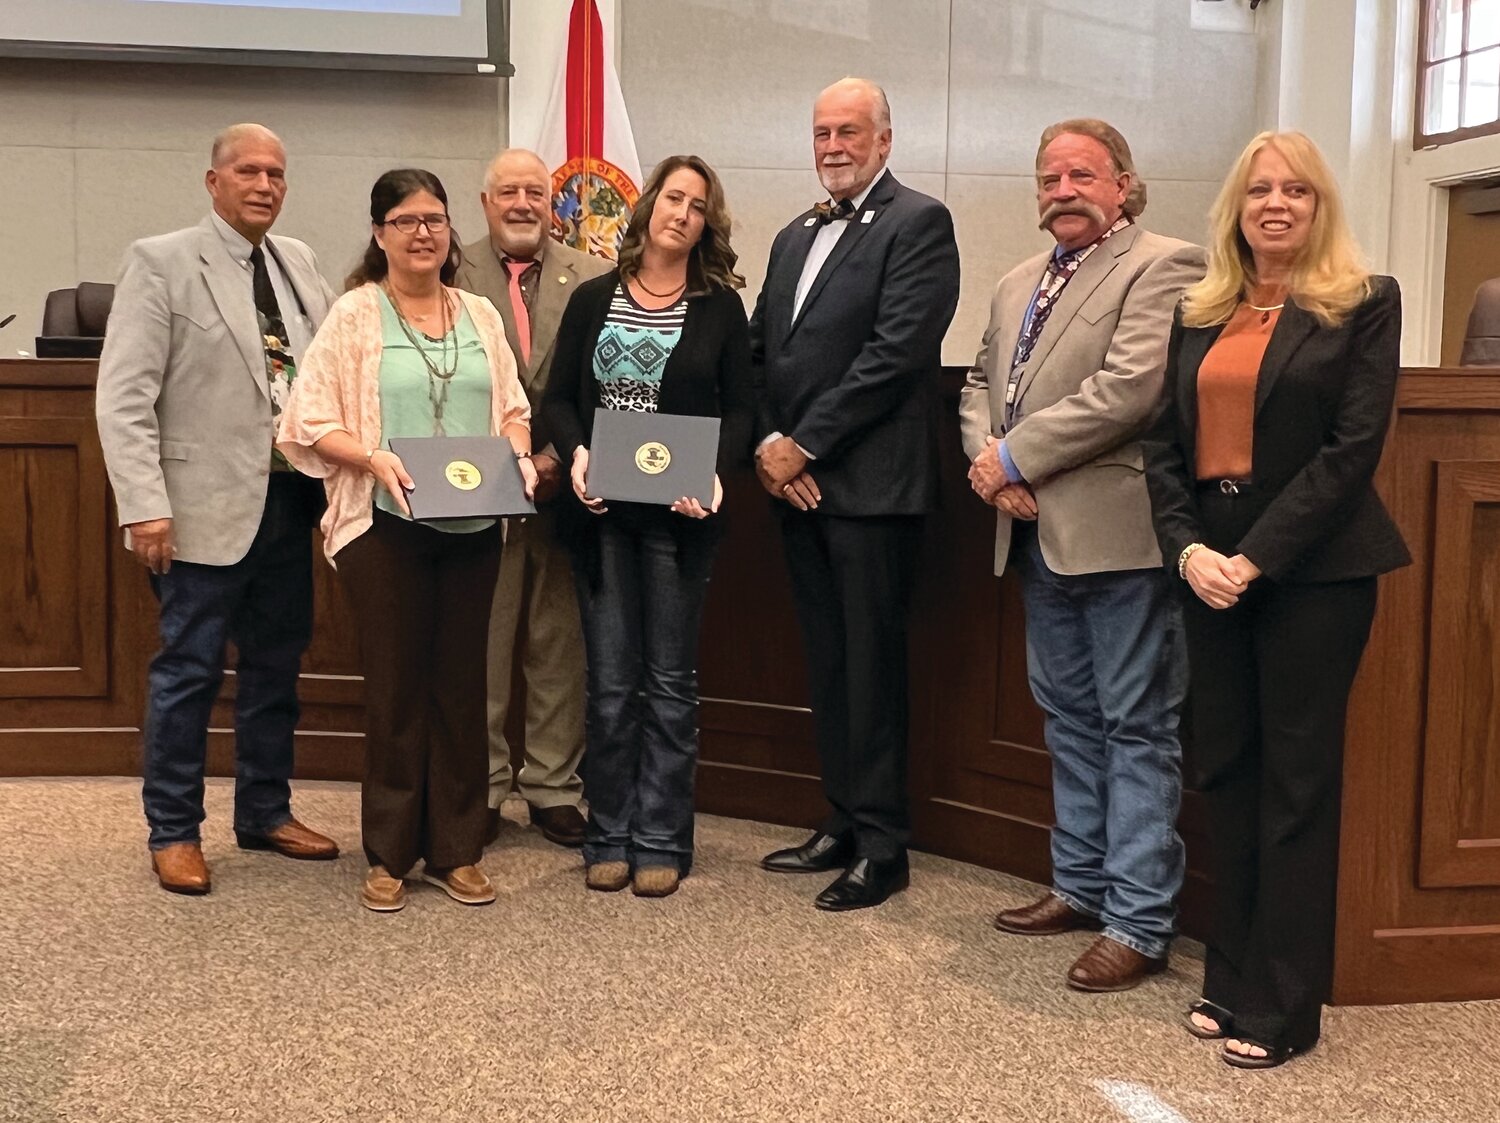 OKEECHOBEE --Pauline Daniel and Tiffany Gould were honored at the Oct. 26 meeting of the Okeechobee County Commission. Left to right are Commission Chairman David Hazellief, Daniel, Commissioner Frank DeCarlo, Gould, Commissioner Terry Burroughs, Commissioner Brad Goodbread and County Manager Deborah Manzo.